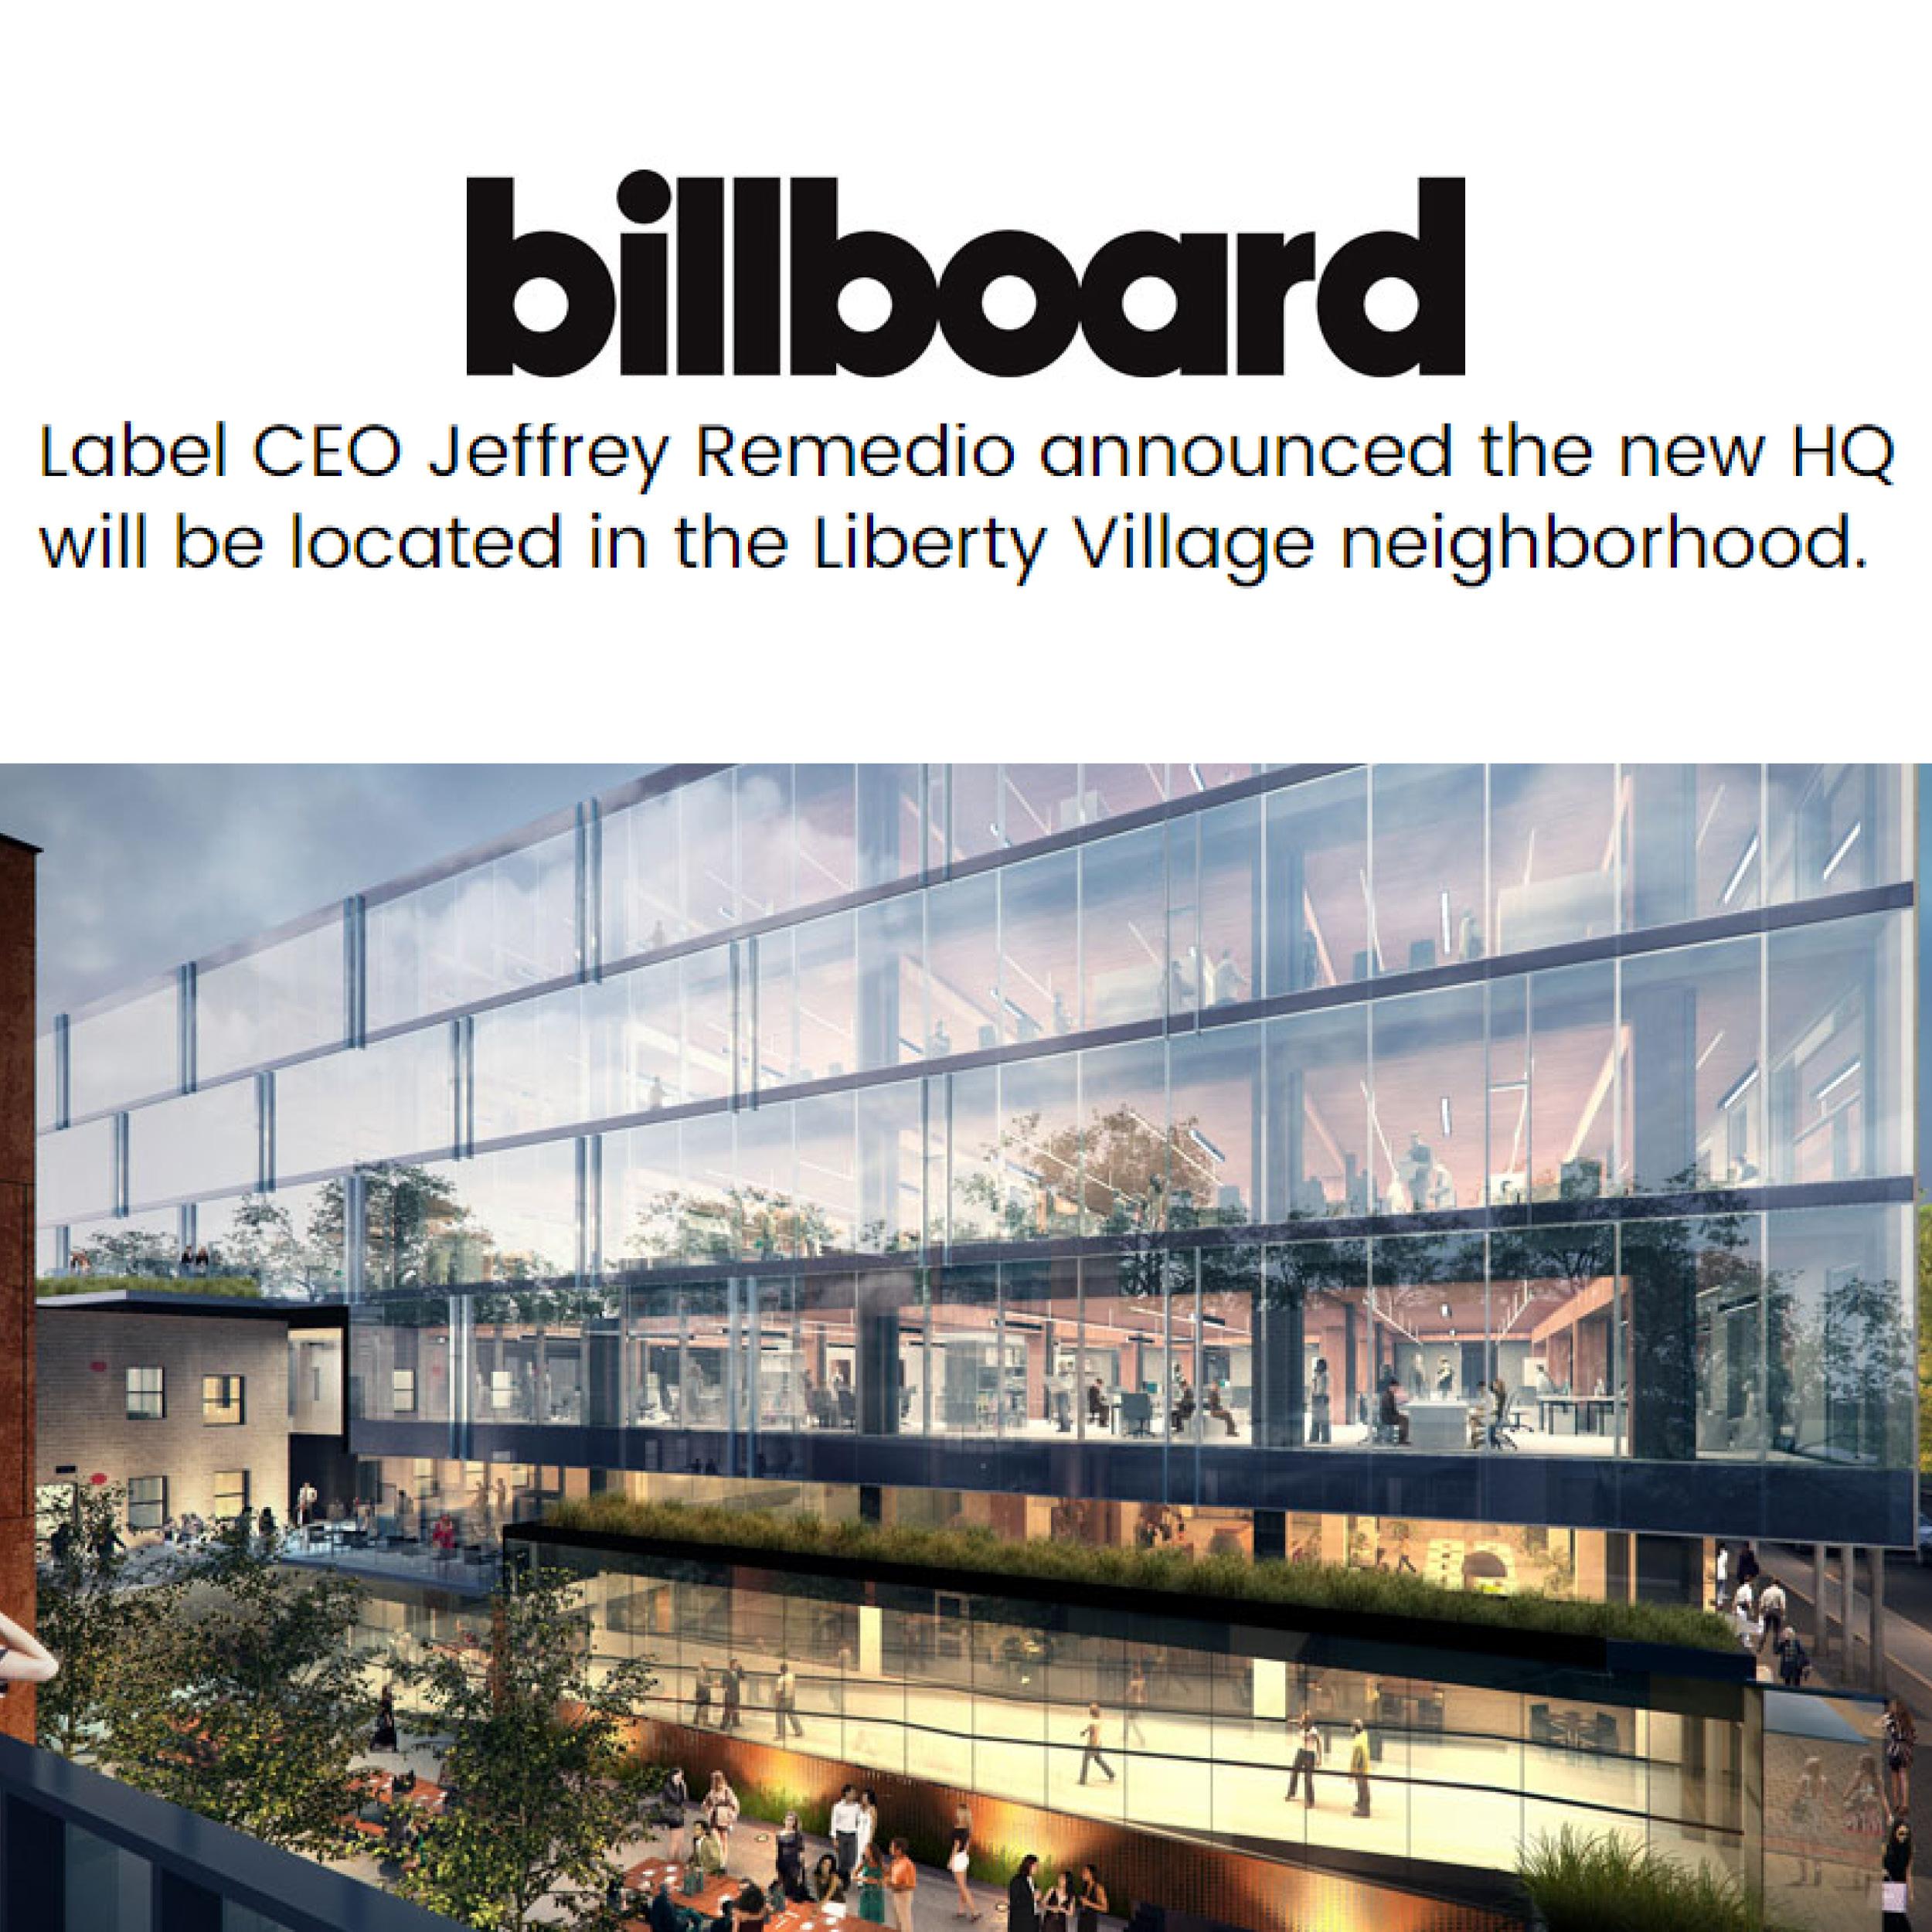 rendering of 80 Atlantic with the Billboard logo and the headline "Label CEO Jeffrey Remedios Announced the new HQ will be located in the Liberty Village neighbourhood"